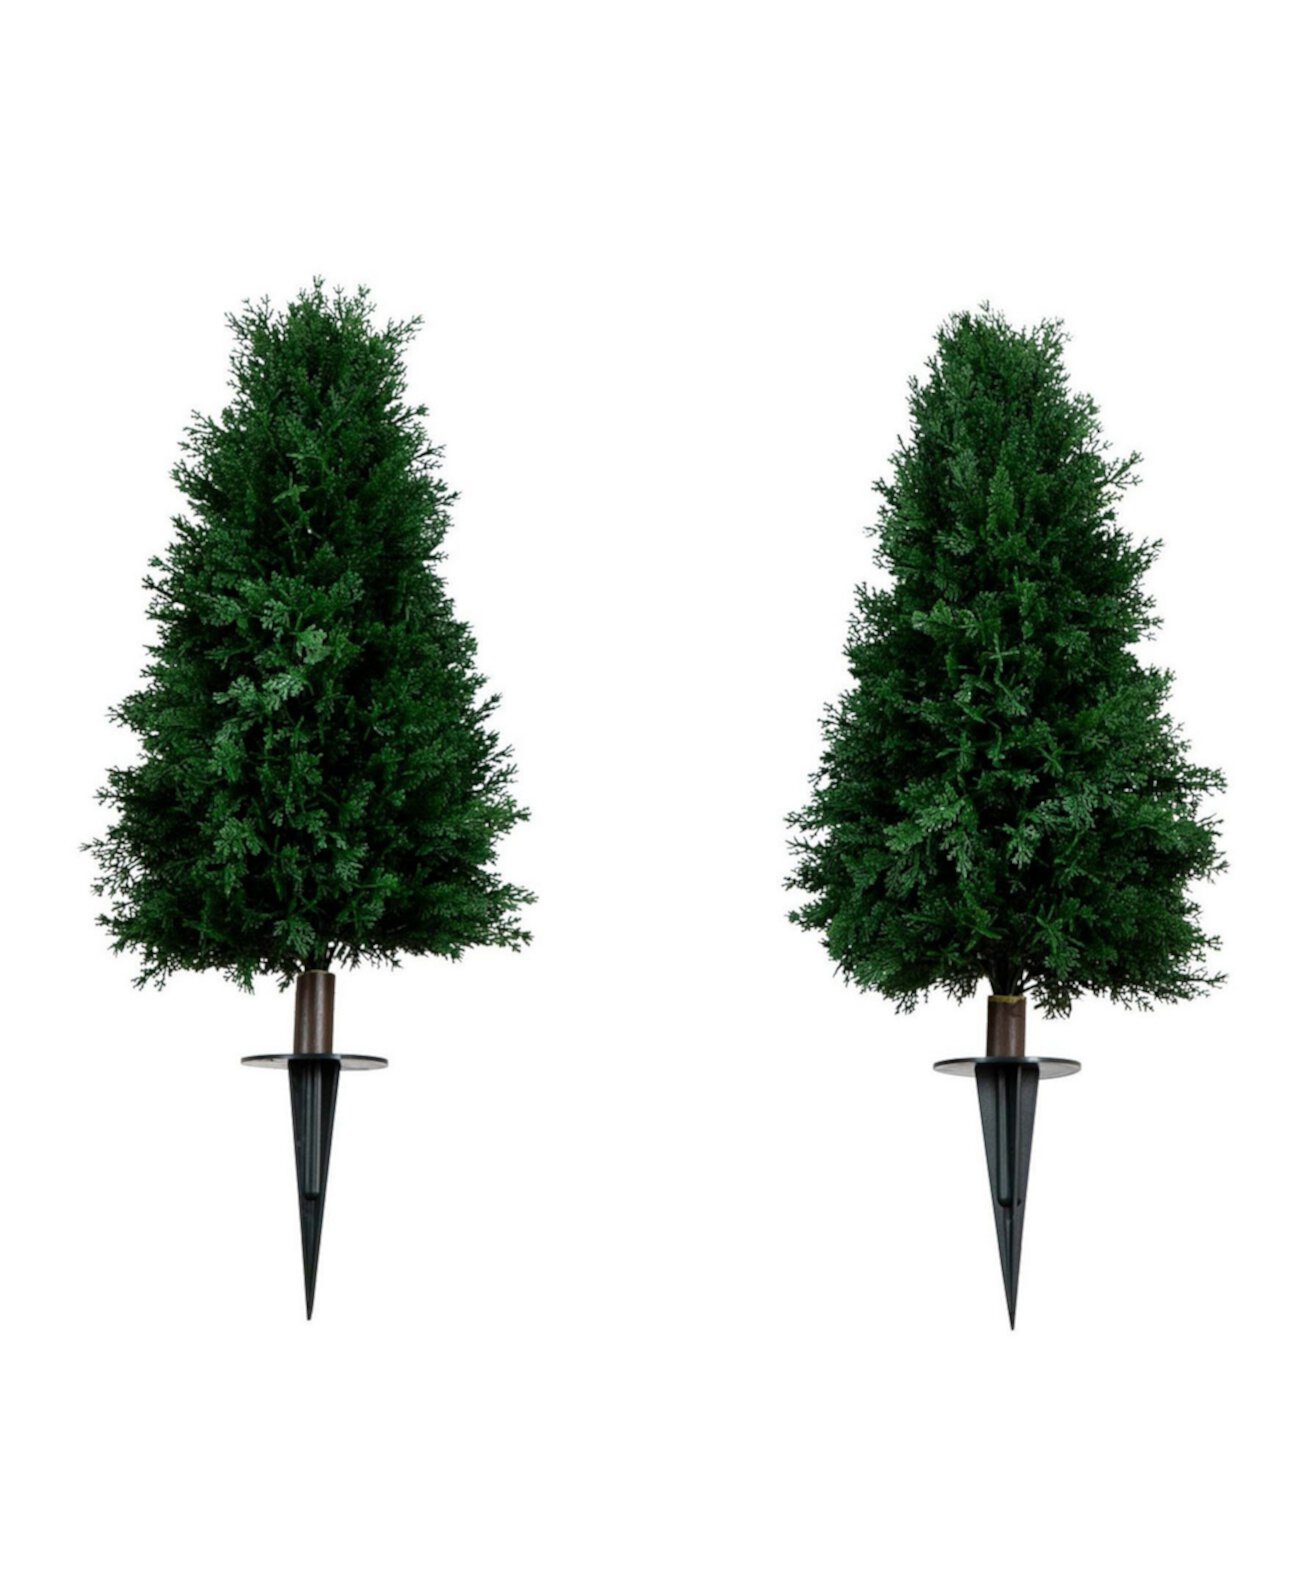 2.5ft. UV Resistant Artificial Cedar Plant with Integrated Ground Stake Indoor/Outdoor - Set of 2 NEARLY NATURAL